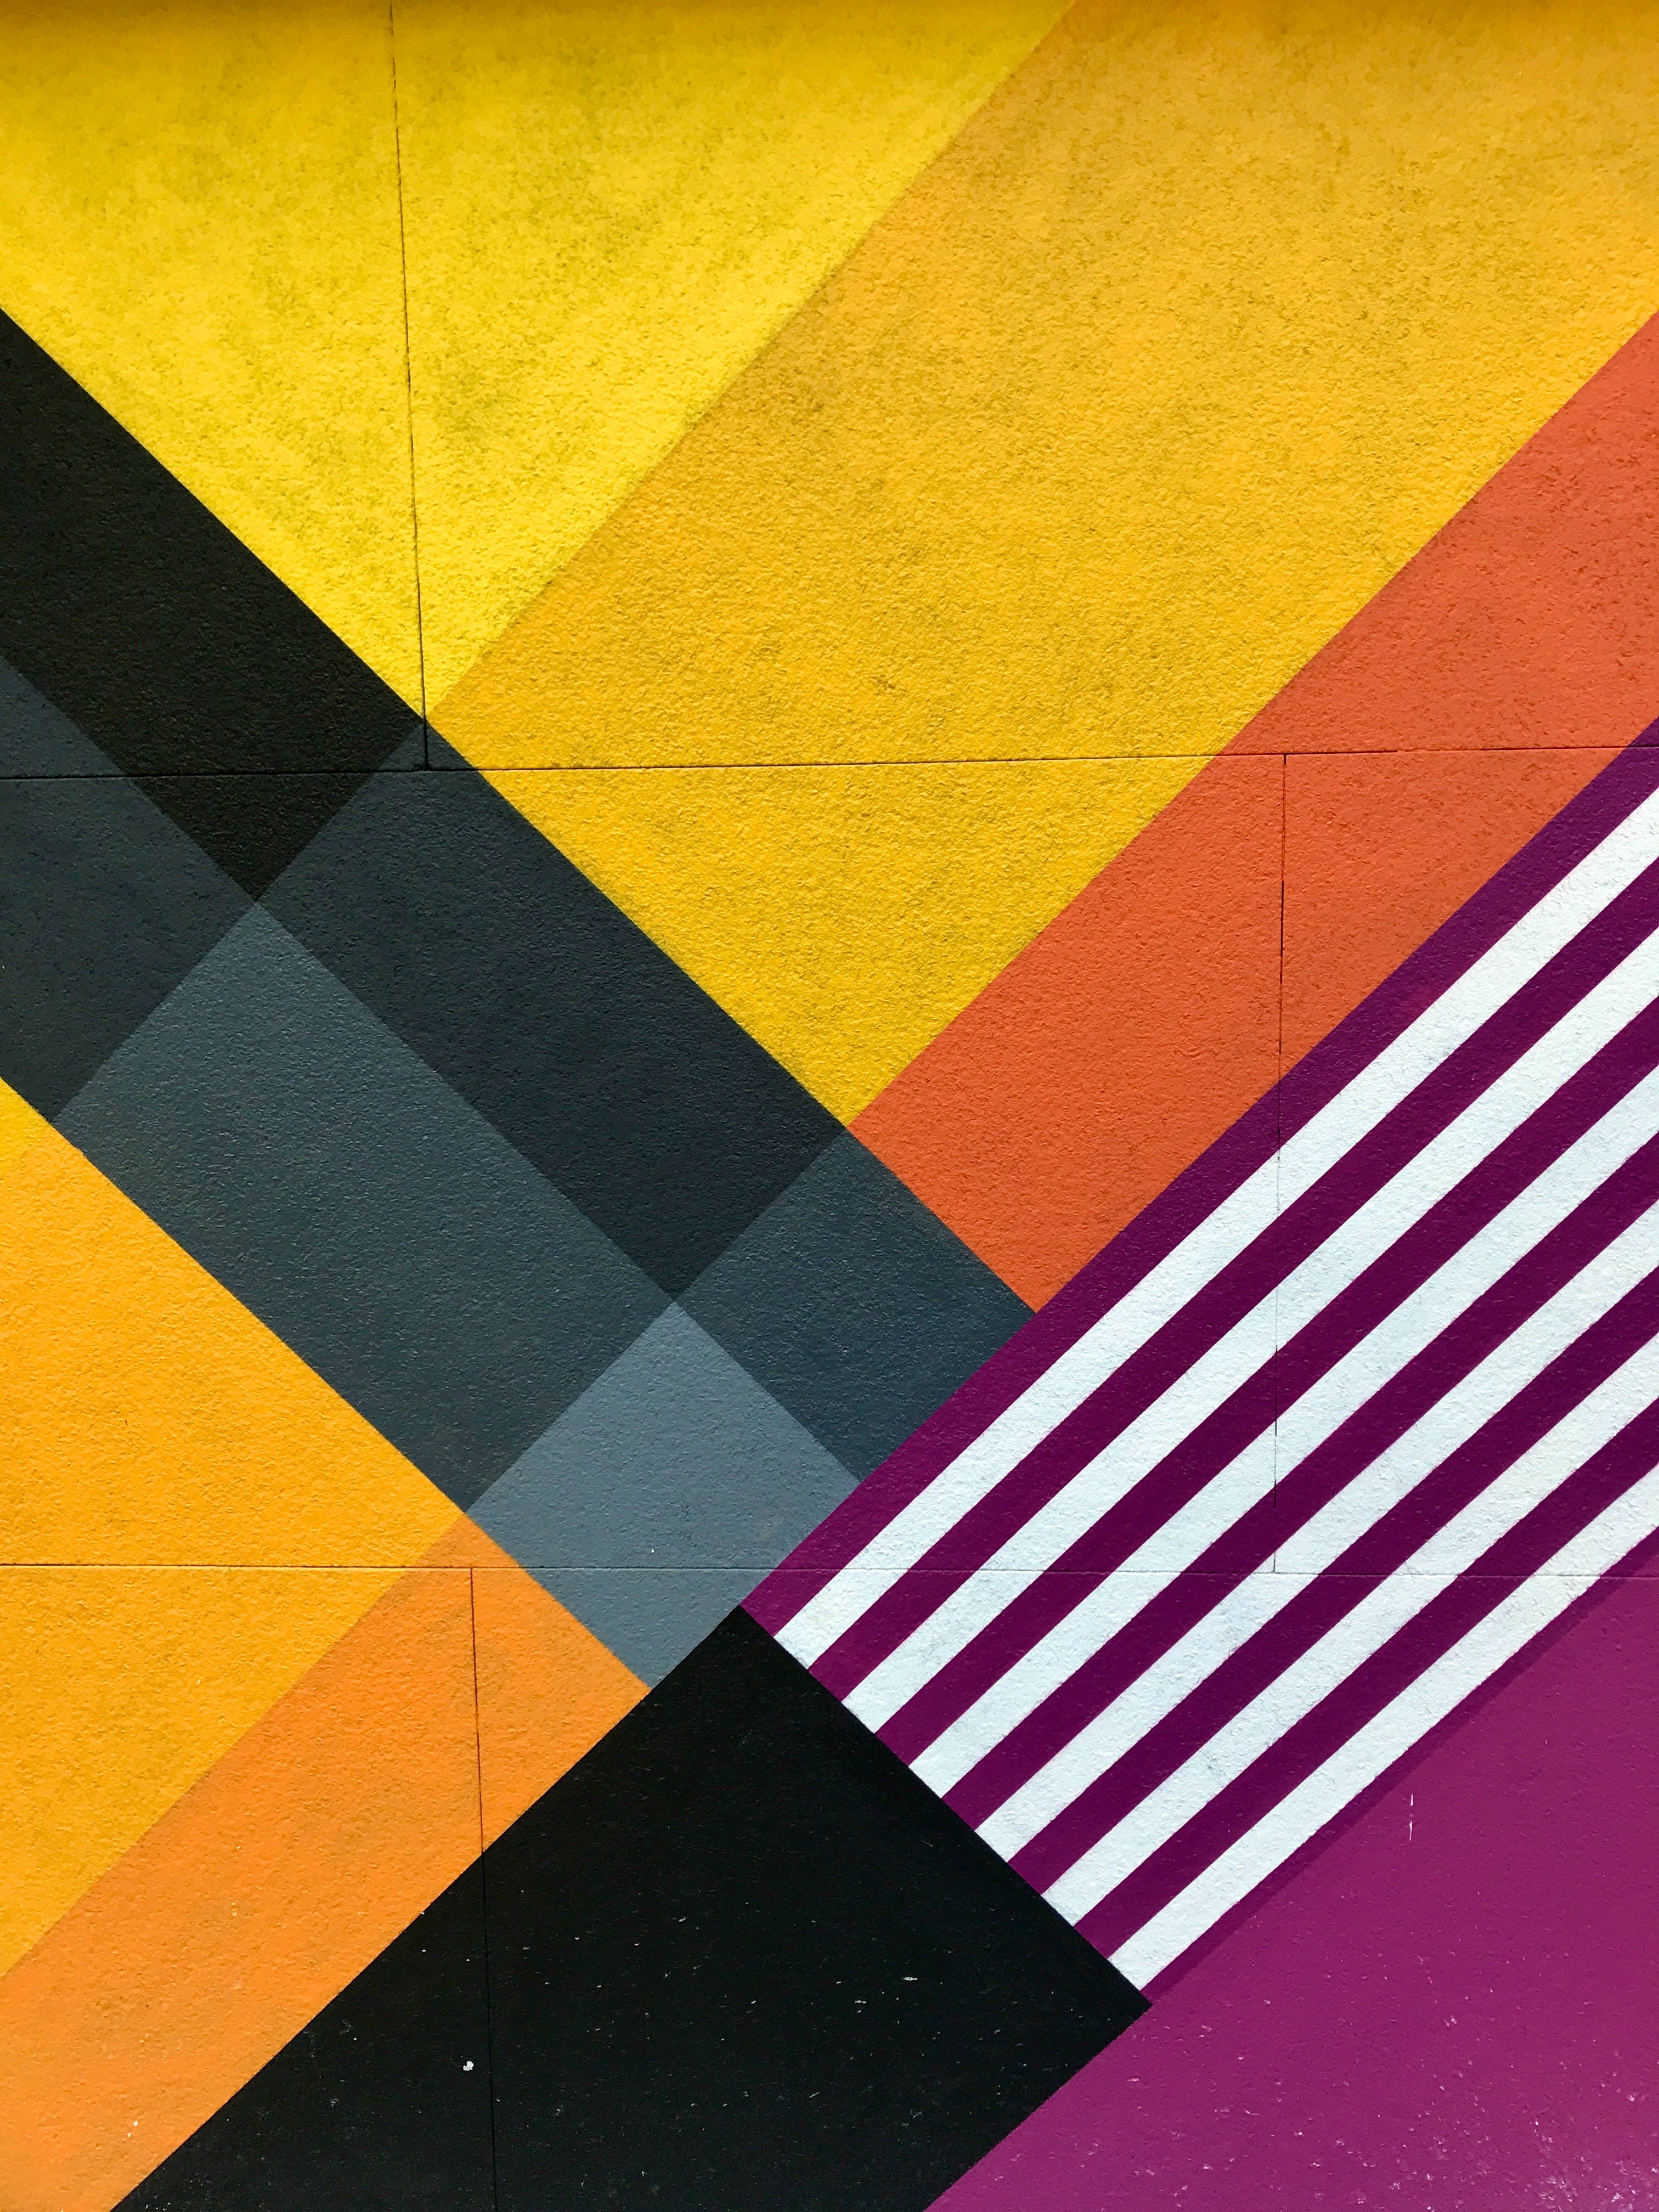 Wall mural, geometry, abstract, multicolored desktop Images